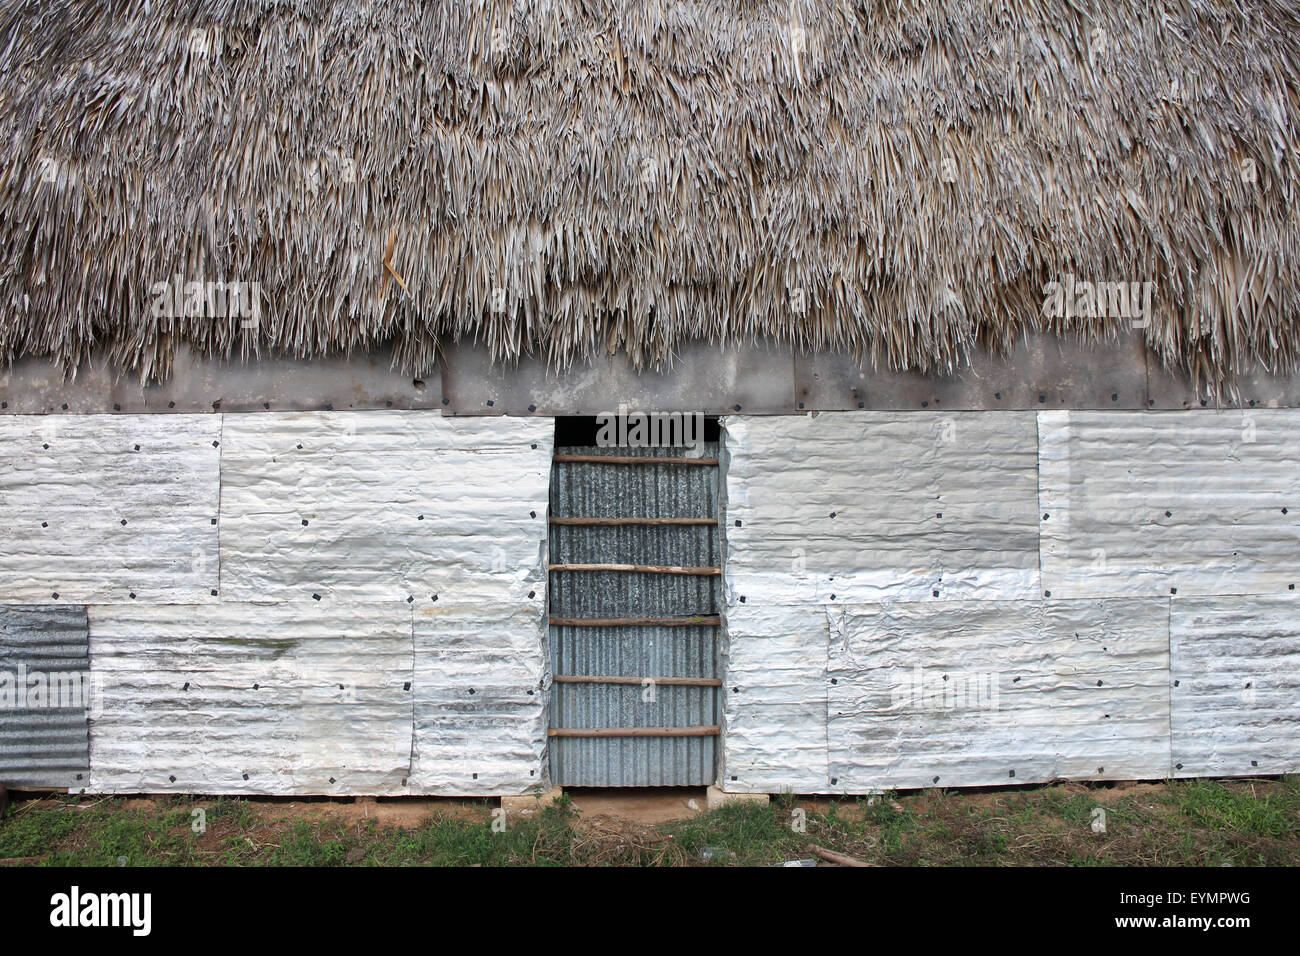 Cuba, tobacco plantation and thatched rural huts in Vinales National Park. UNESCO World Heritage Site. Stock Photo